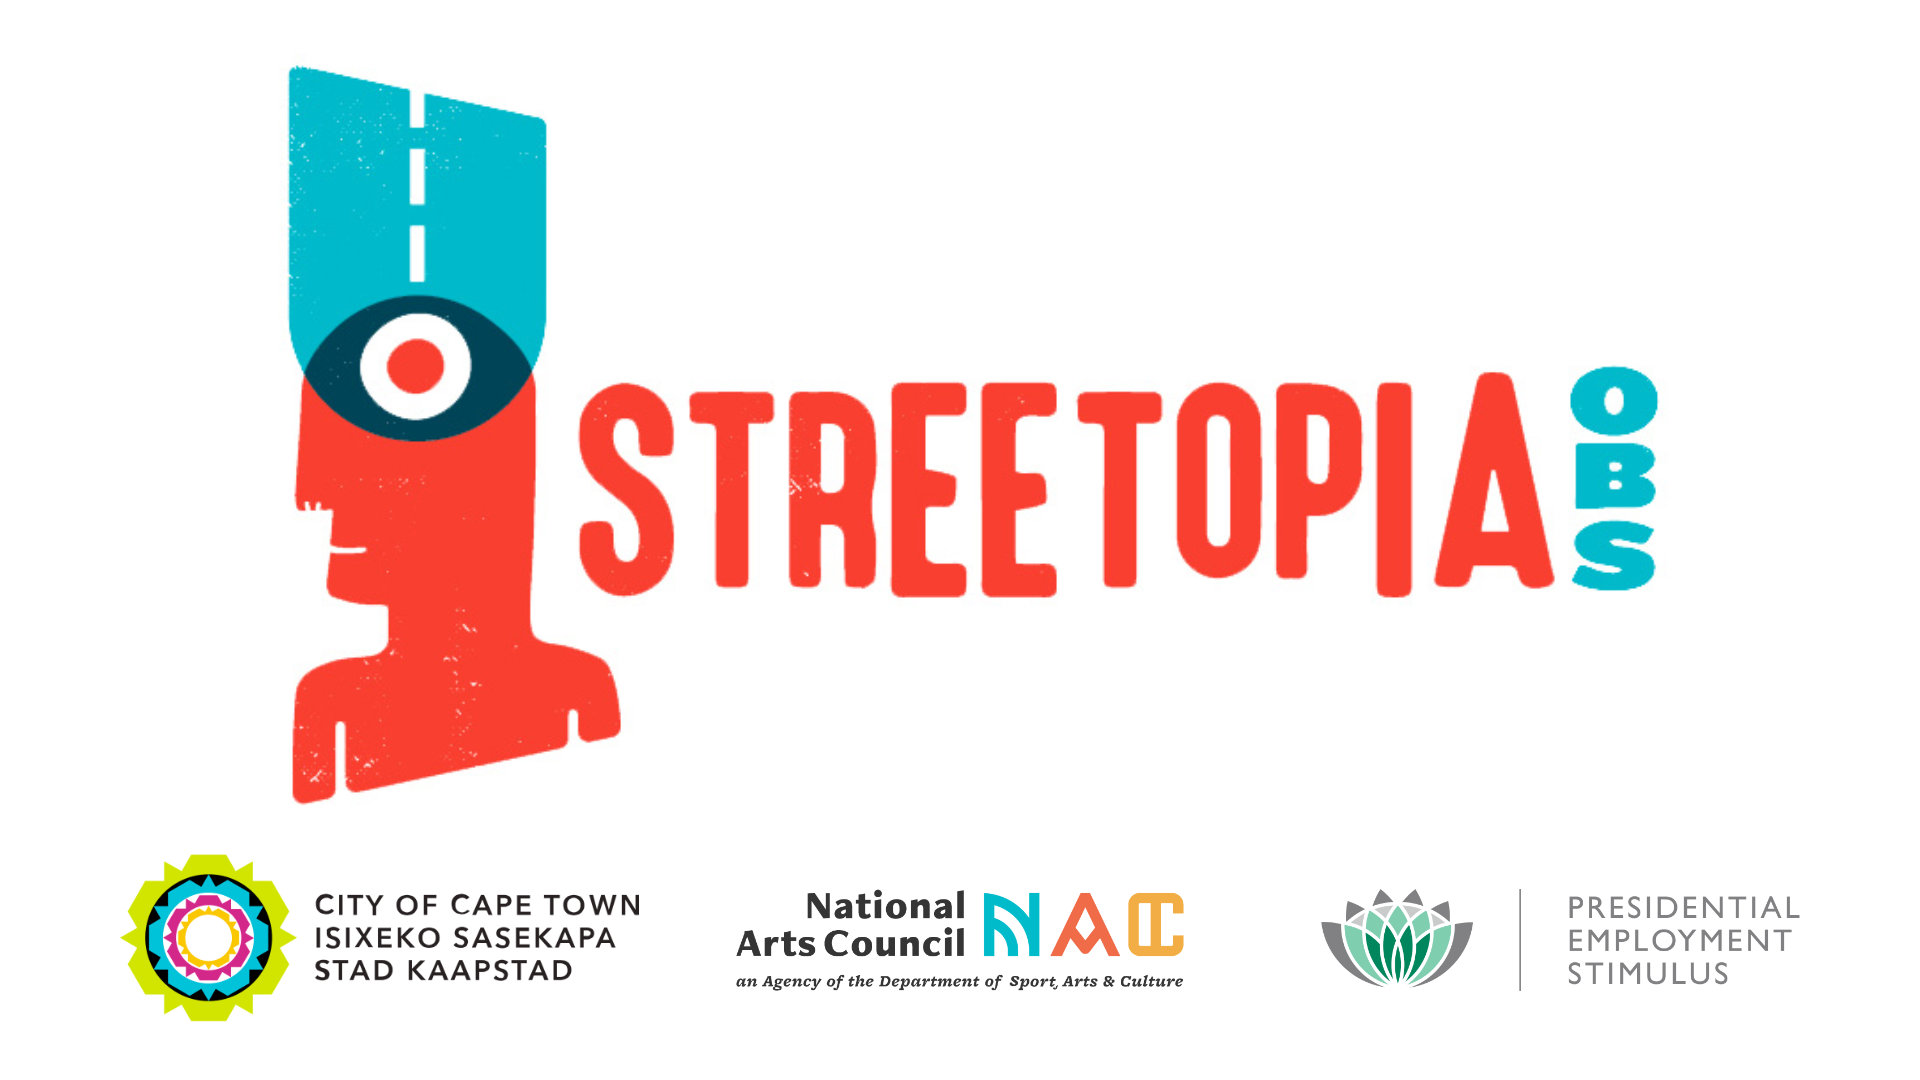 Streetopia 2023 Call for arts proposals